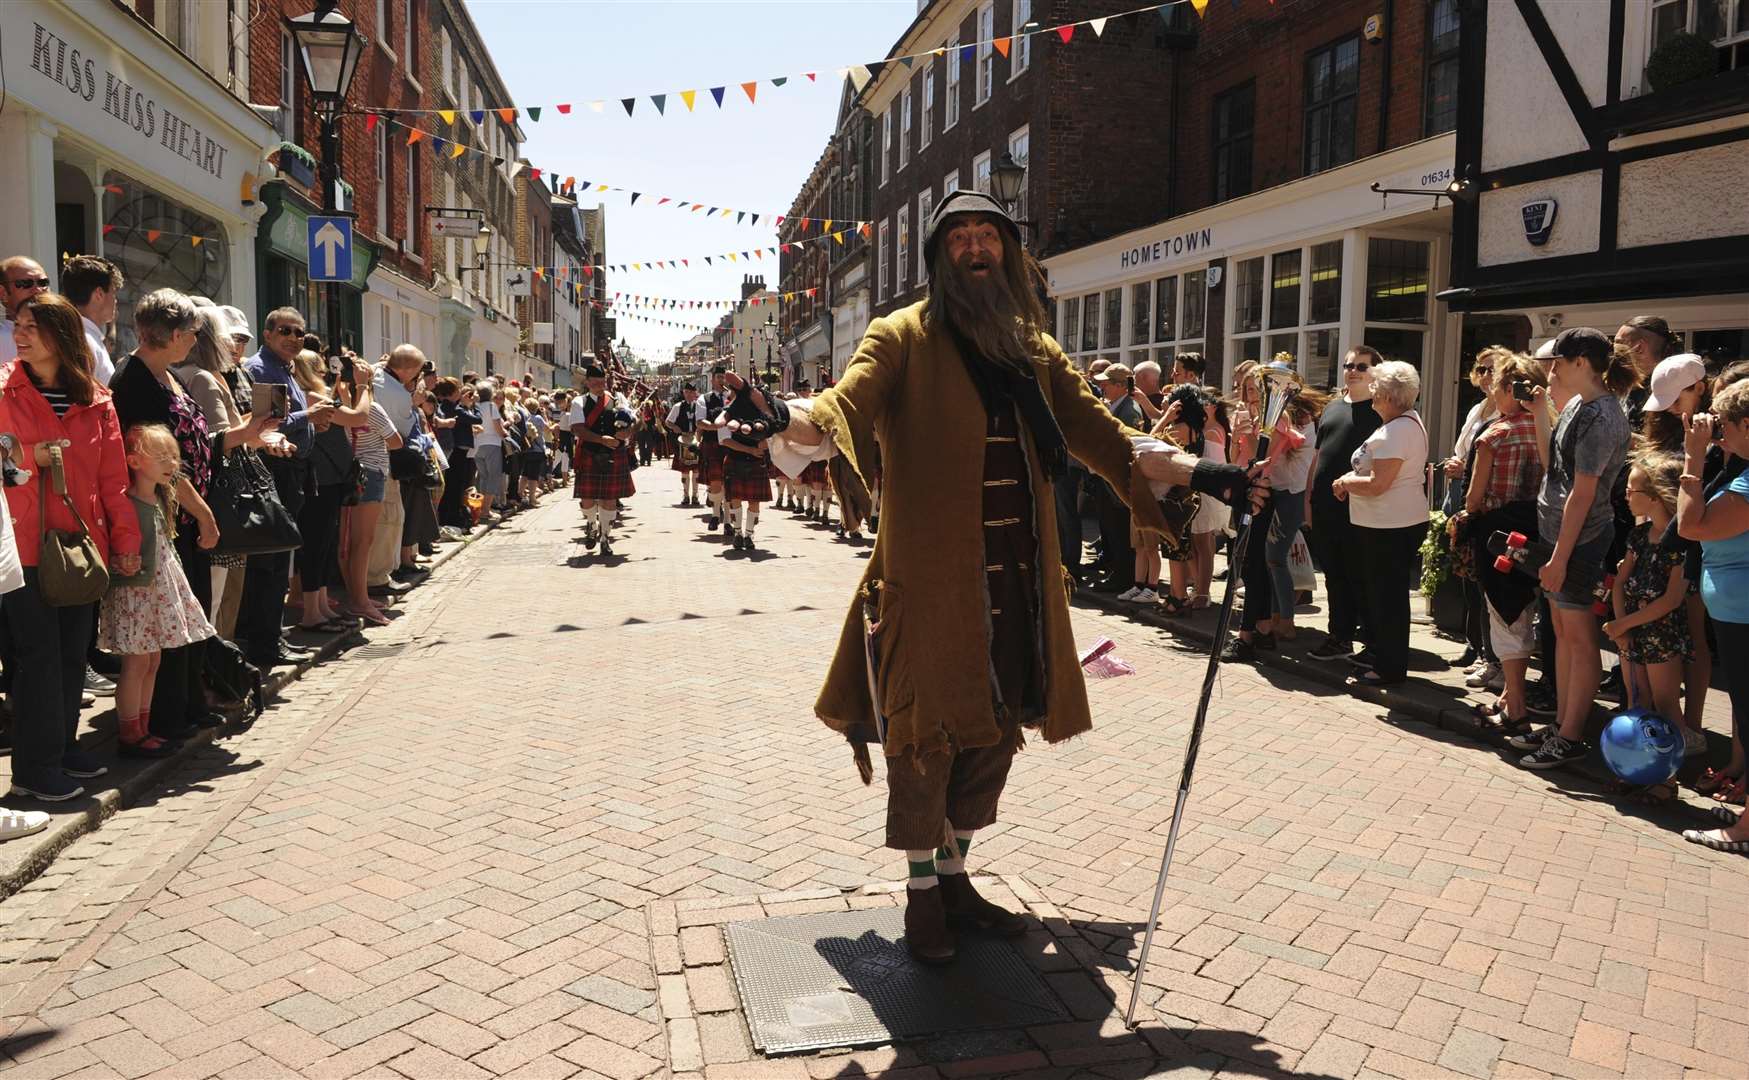 The High Street, Rochester comes alive for the Dickens Festival